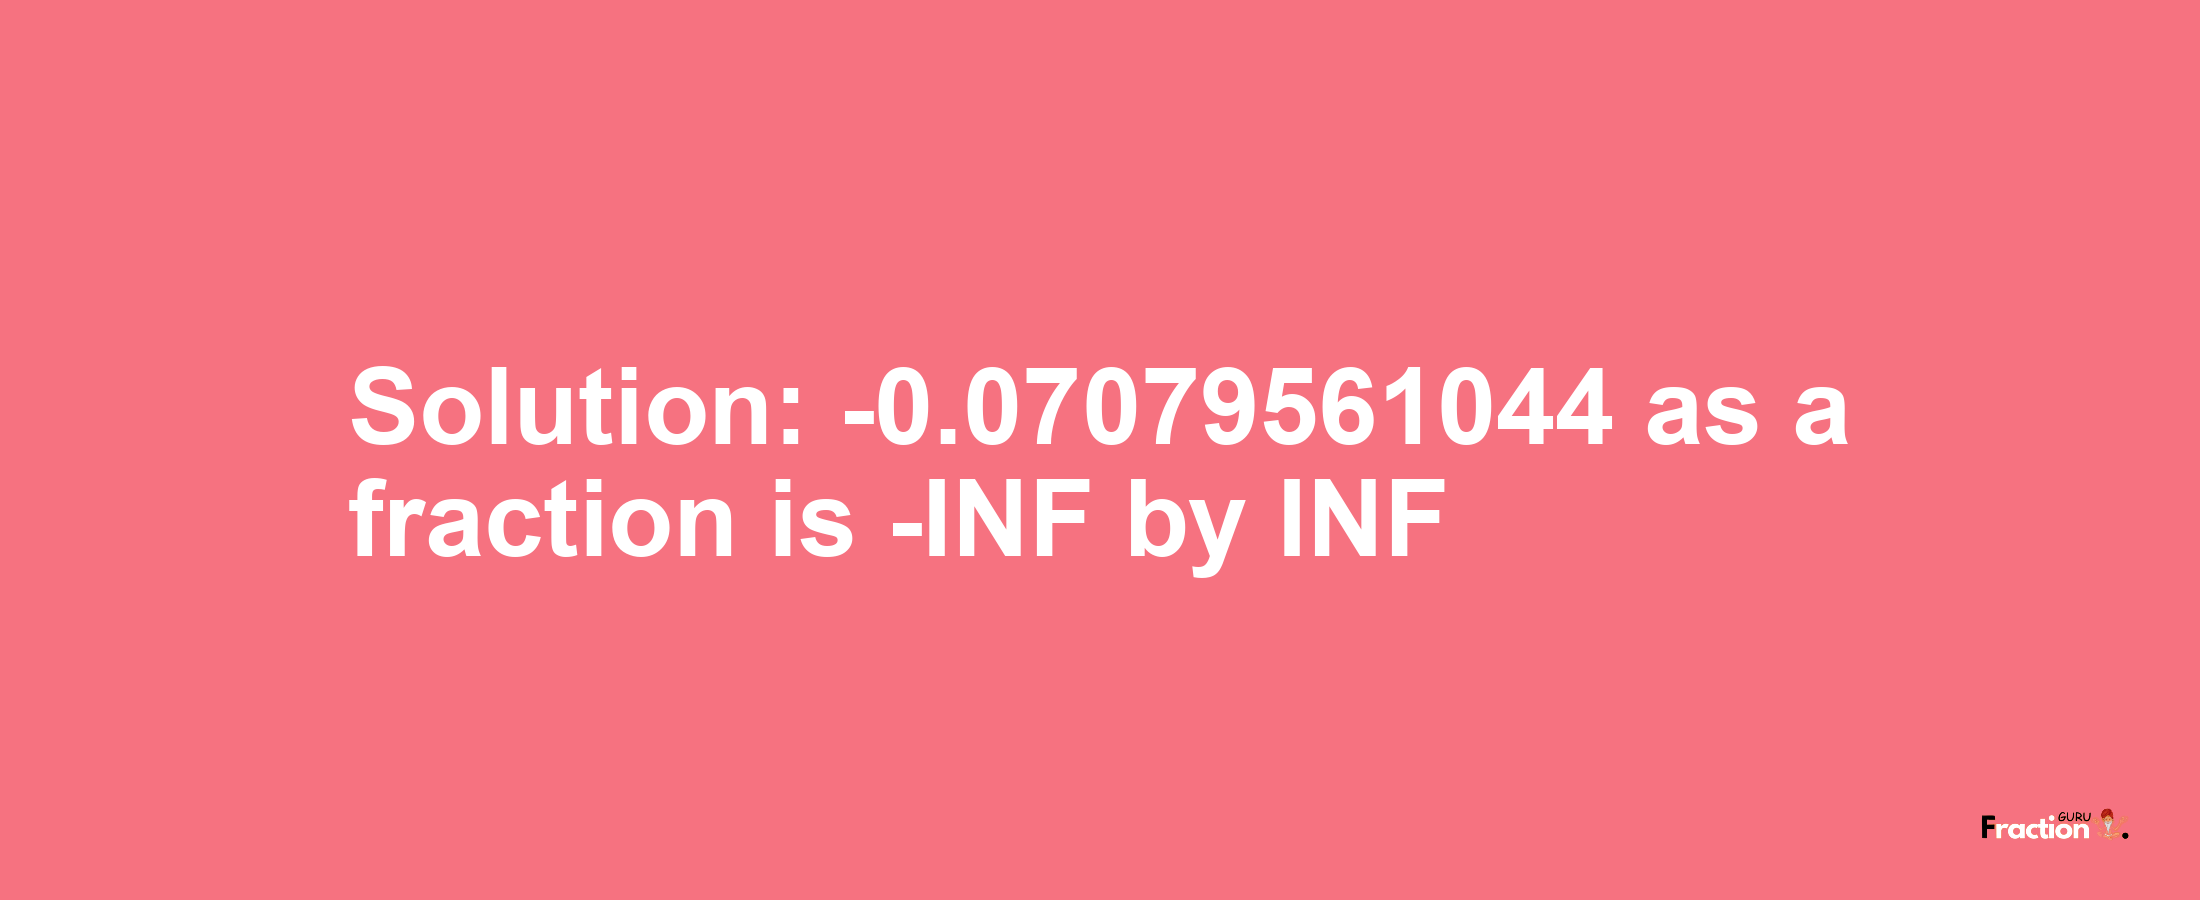 Solution:-0.07079561044 as a fraction is -INF/INF